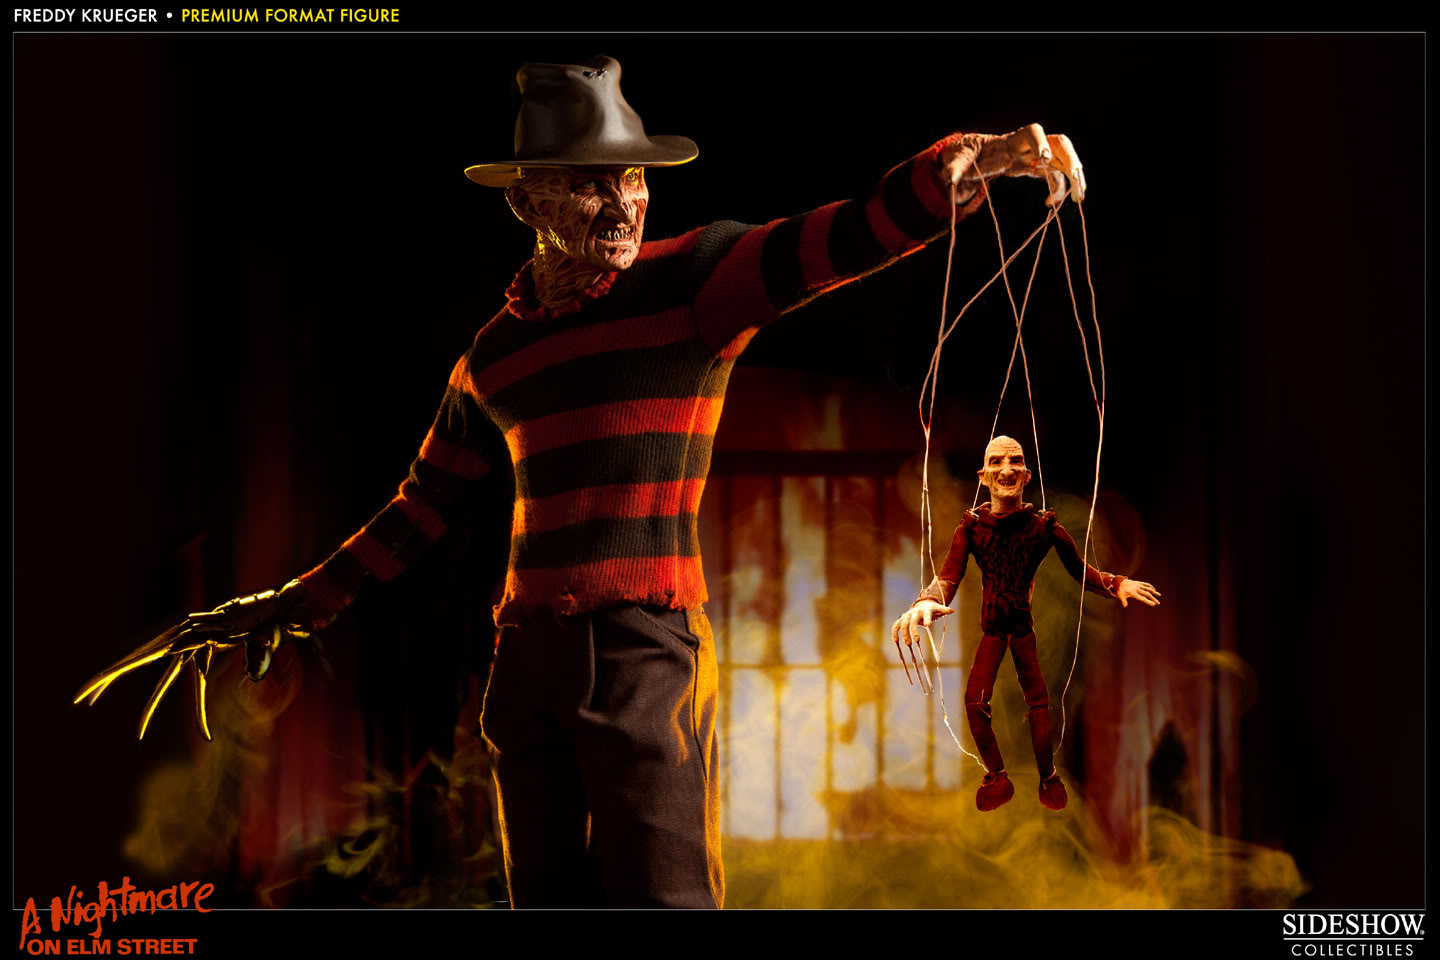 Freddy Krueger Famous Quotes.